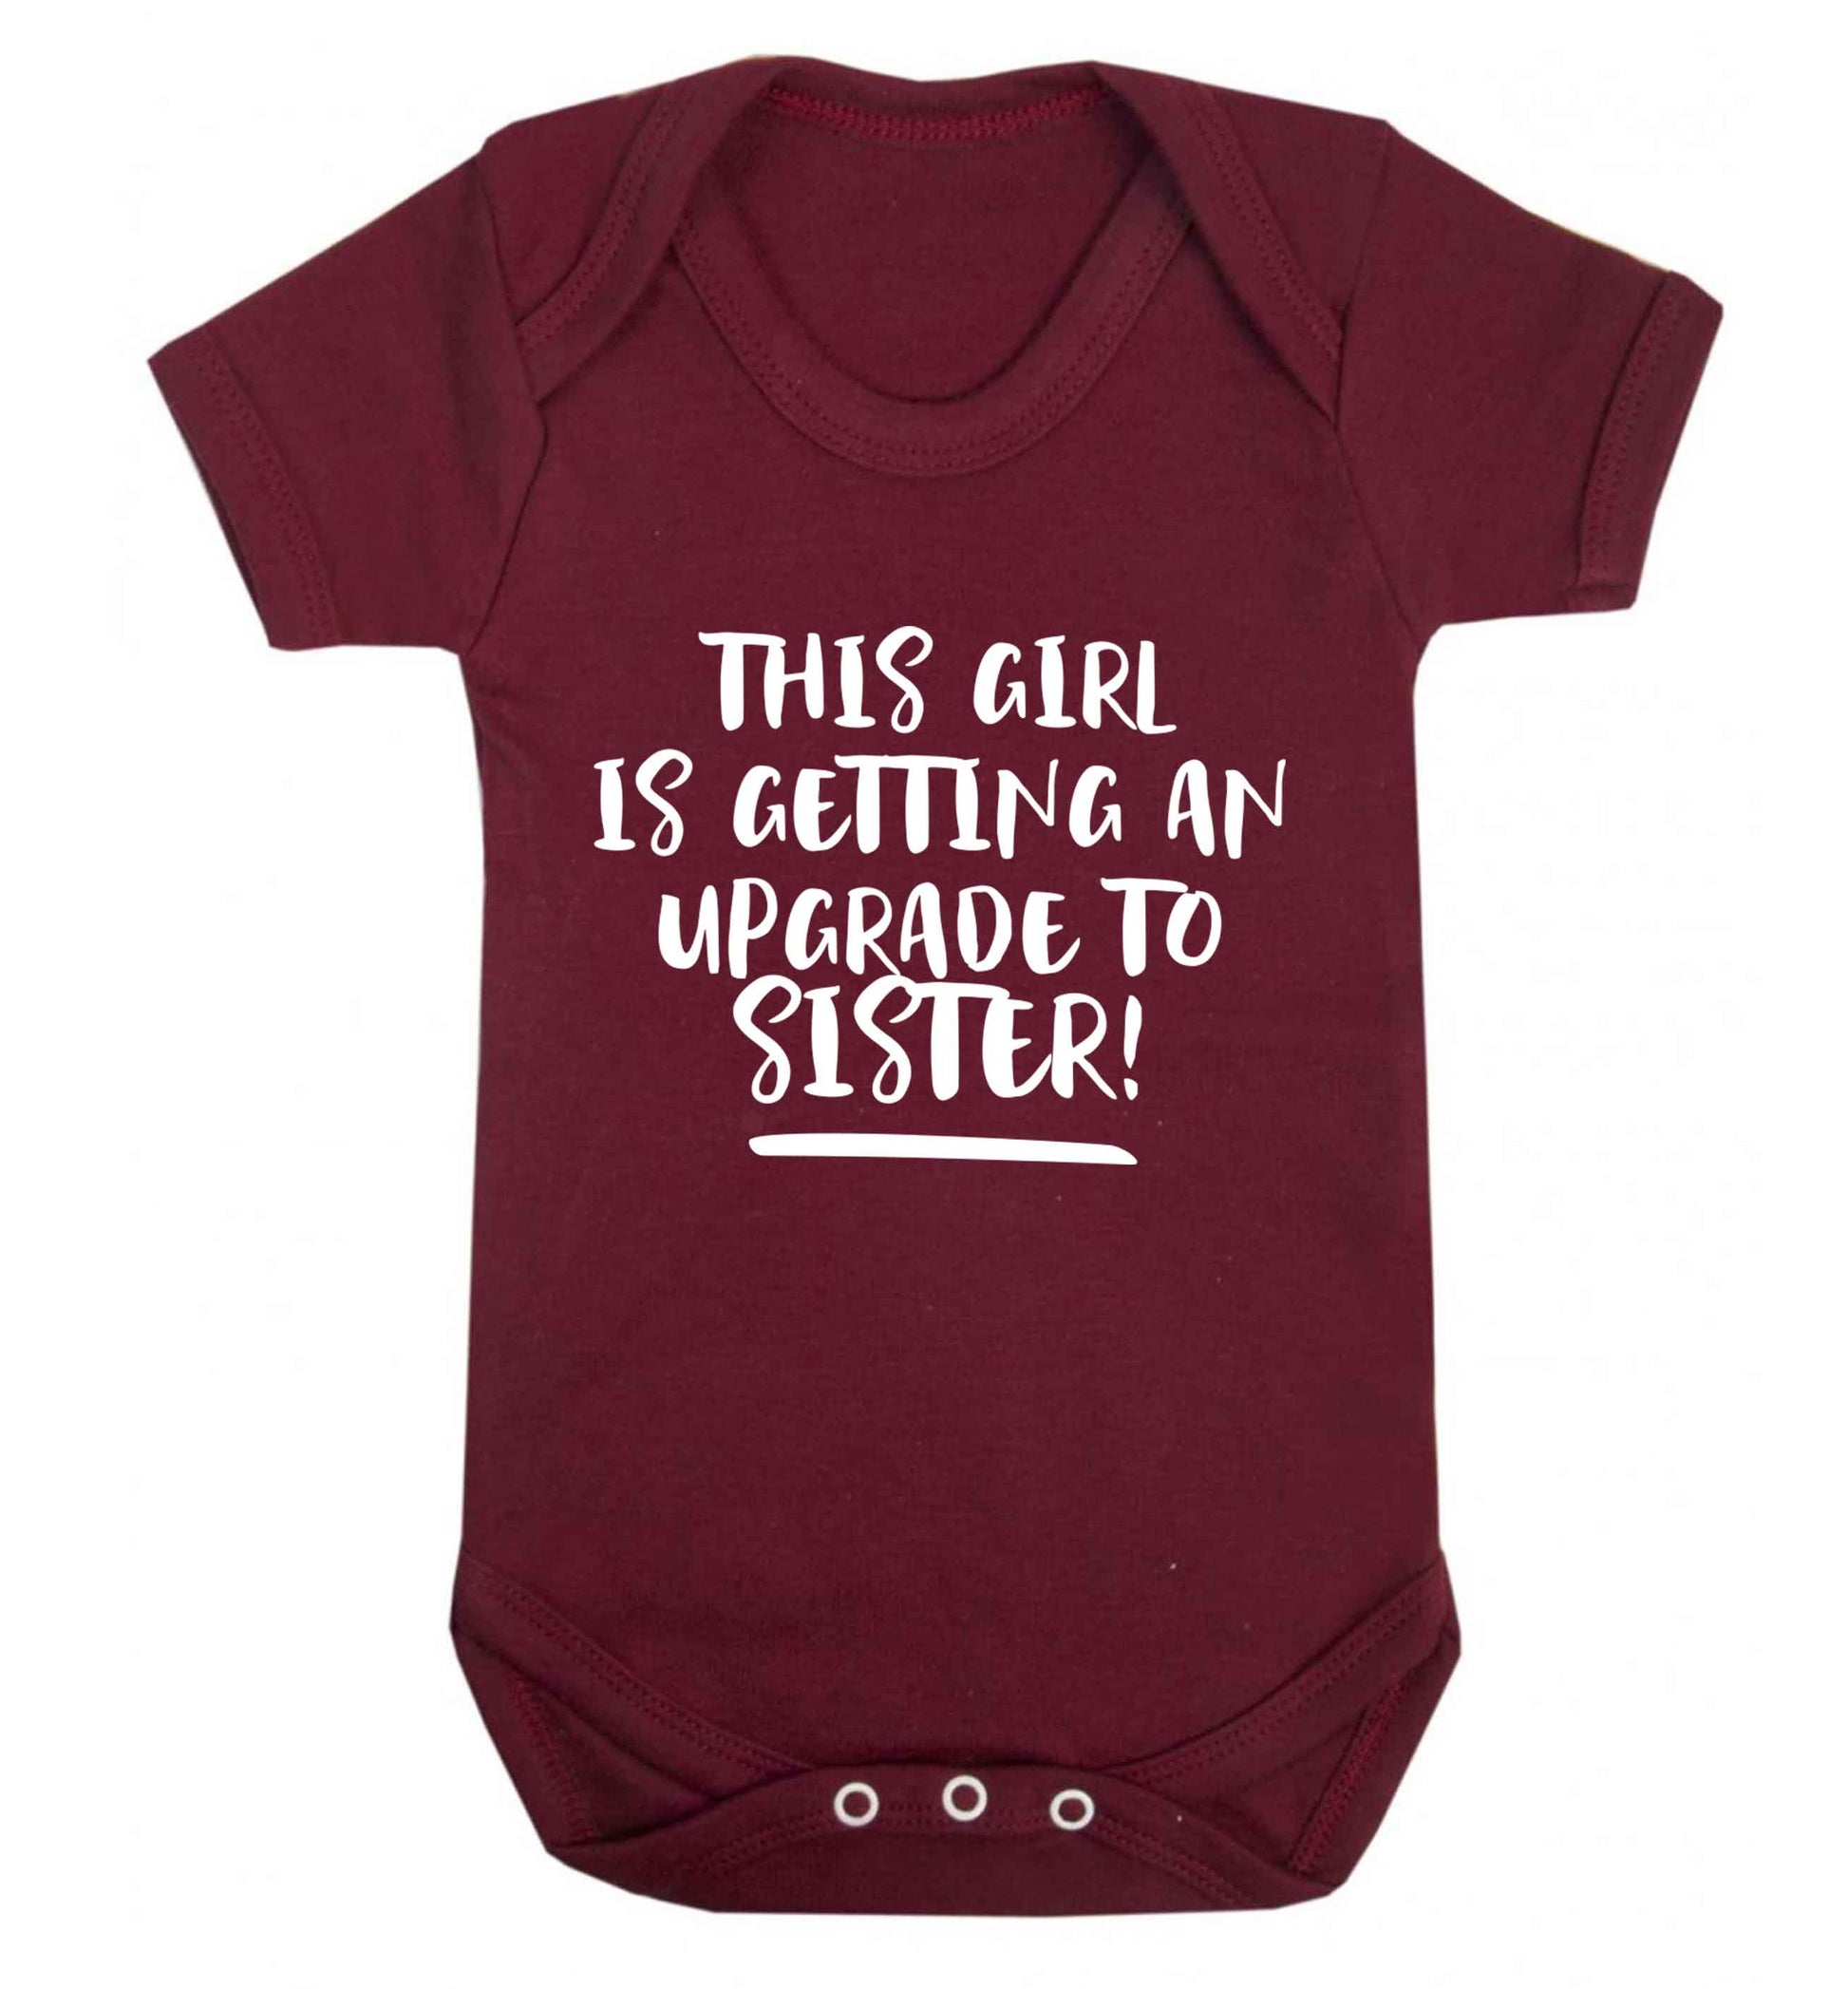 This girl is getting an upgrade to sister! Baby Vest maroon 18-24 months